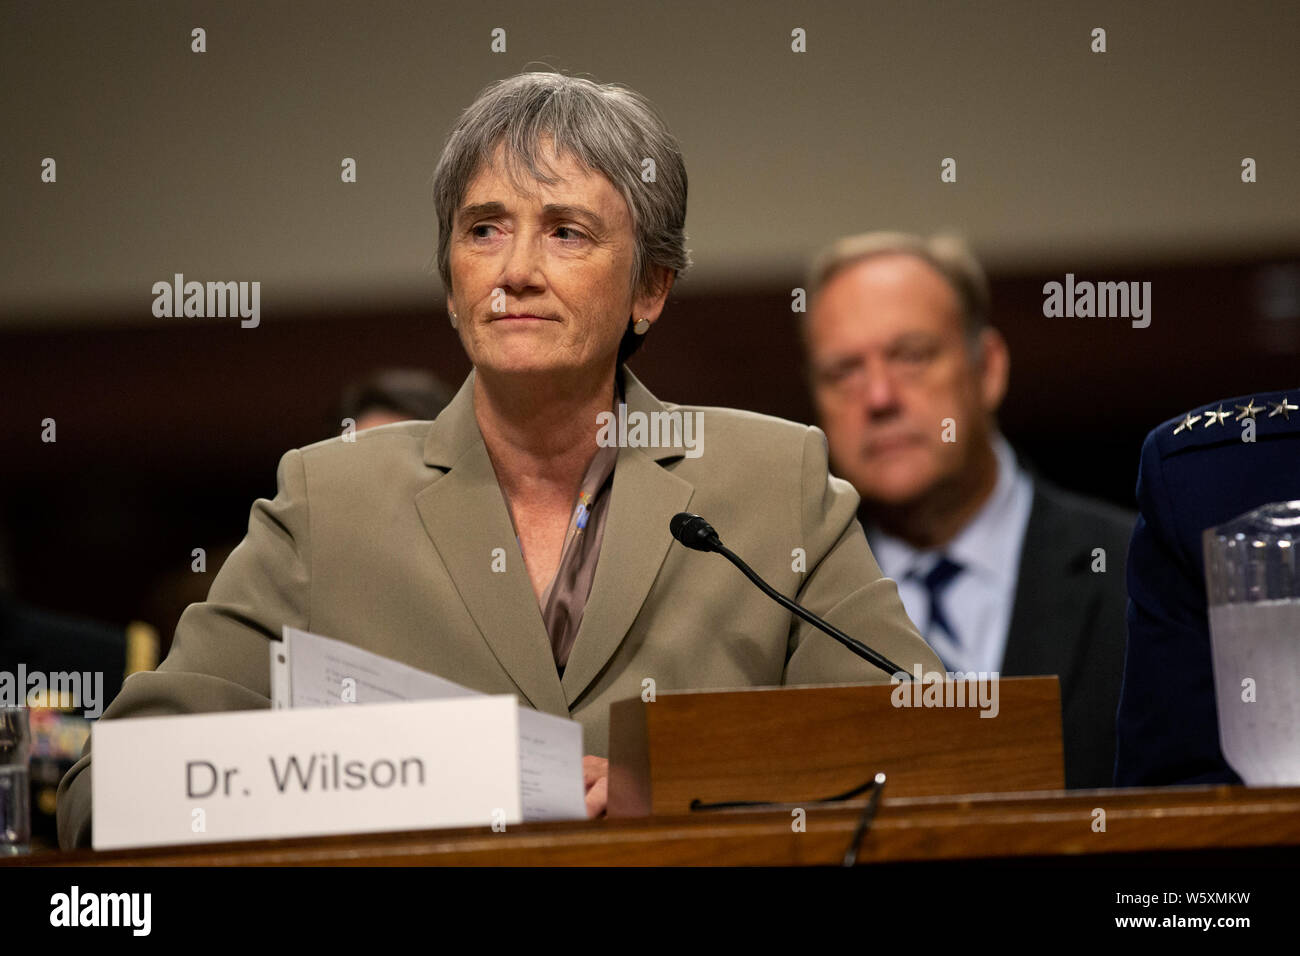 United States Secretary of the Air Force Dr. Heather Wilson testifies on the nomination of Air Force General John Hyten to be Vice Chairman Of The Joint Chiefs Of Staff, before the U.S. Senate Committee on Armed Services during Hyten's hearing on Capitol Hill in Washington, DC, U.S. on July 30, 2019. Credit: Stefani Reynolds/CNP /MediaPunch Stock Photo